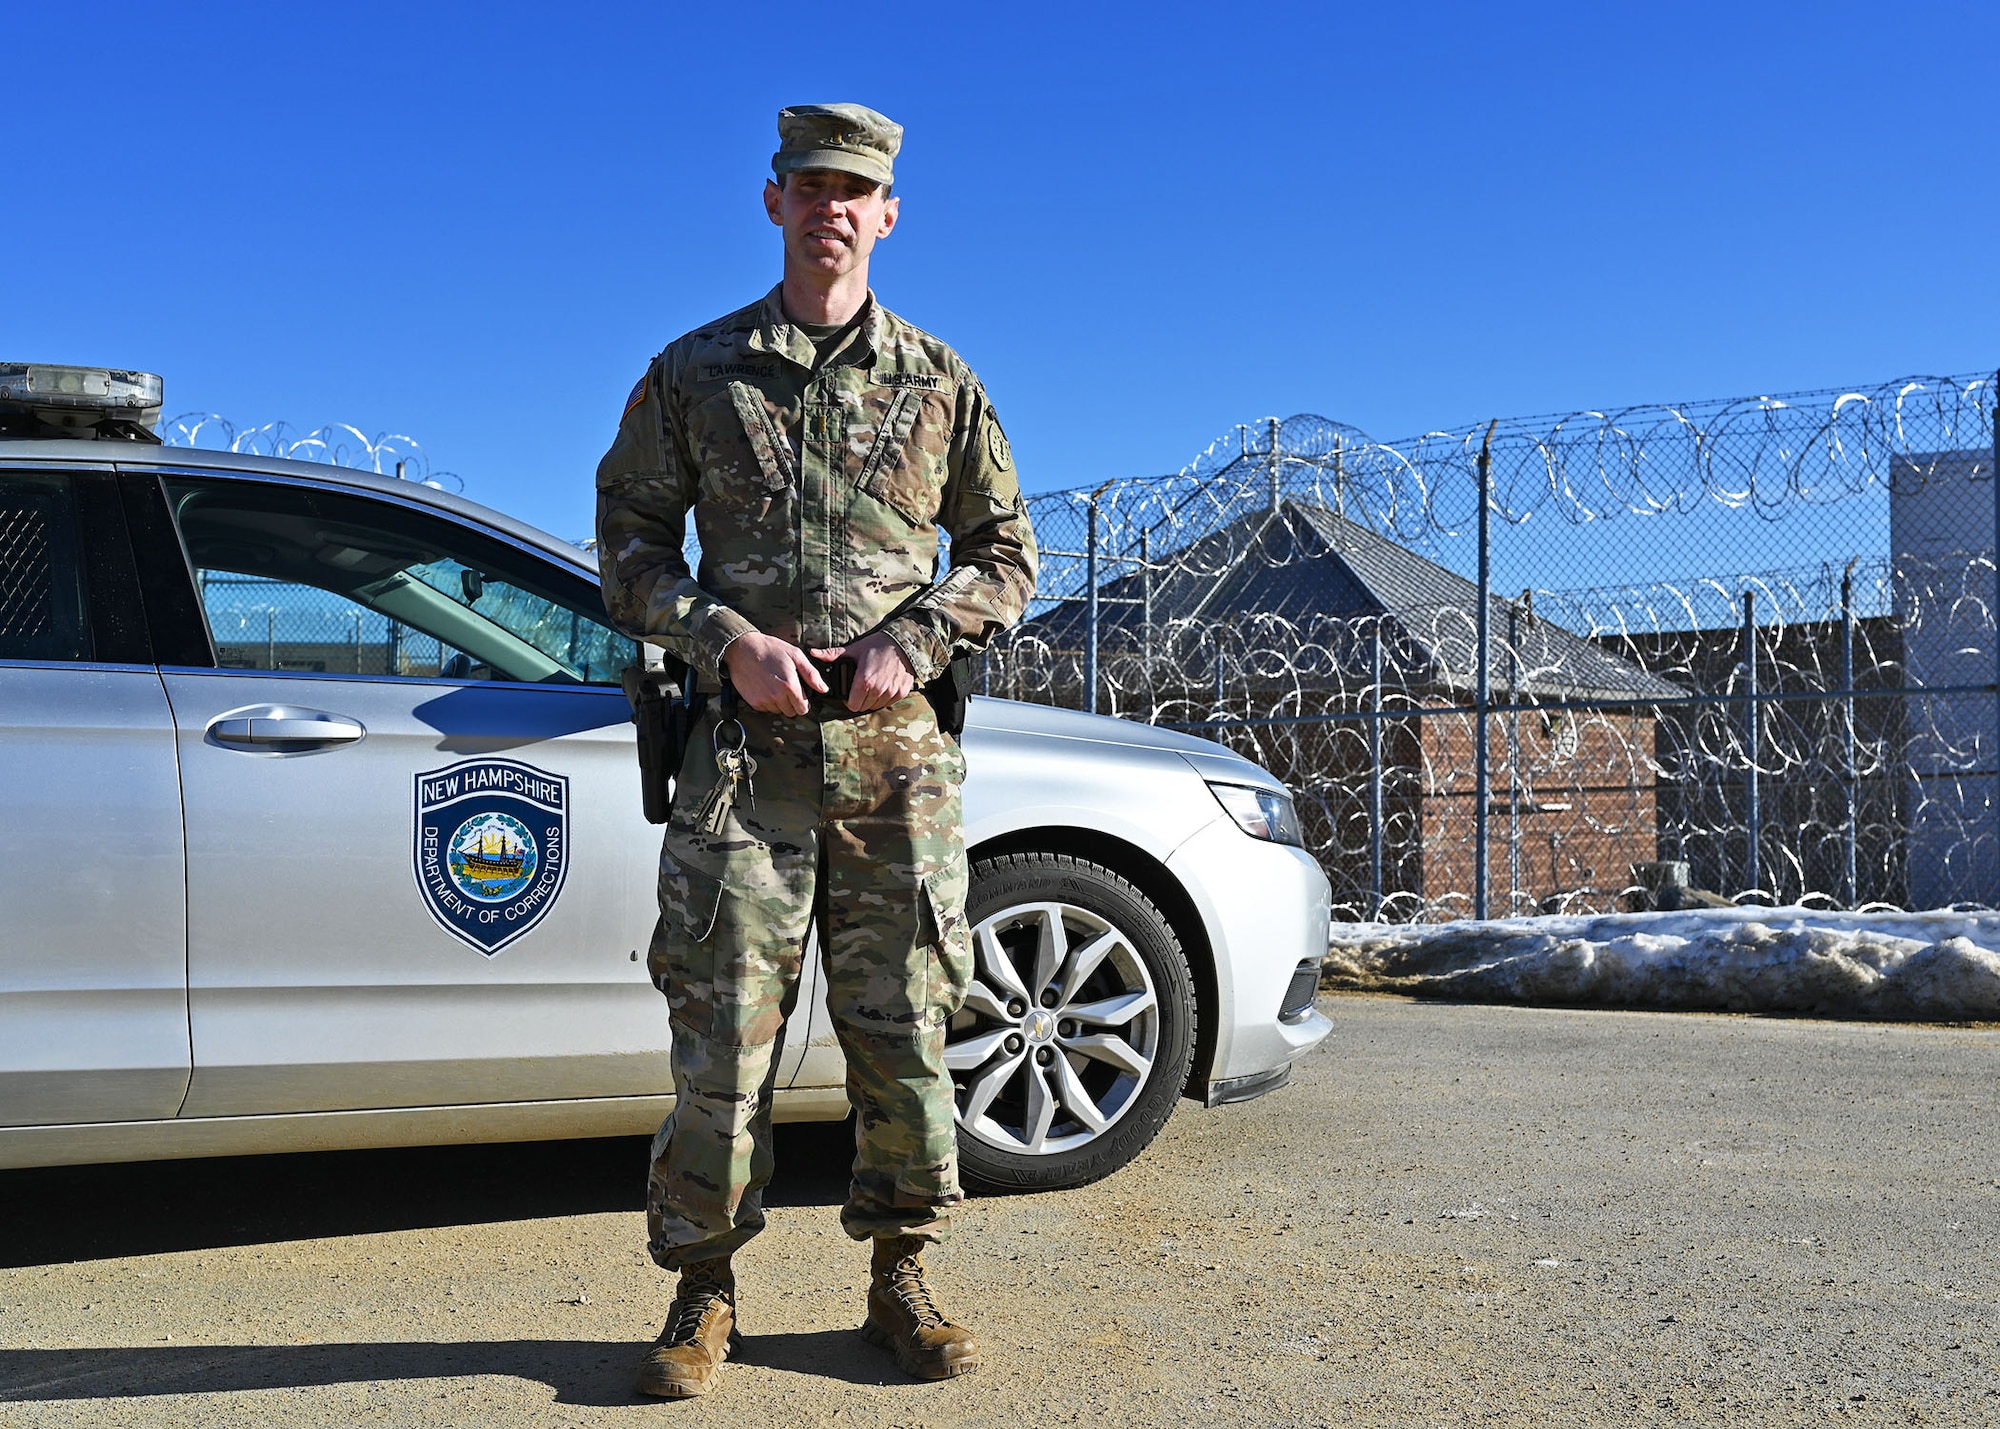 1st Lt. James Lawrence, a military police officer with the 237th MP Company, NHARNG, poses with his issued corrections patrol car on the perimeter of the state prison Jan. 10, 2021, in Concord, N.H